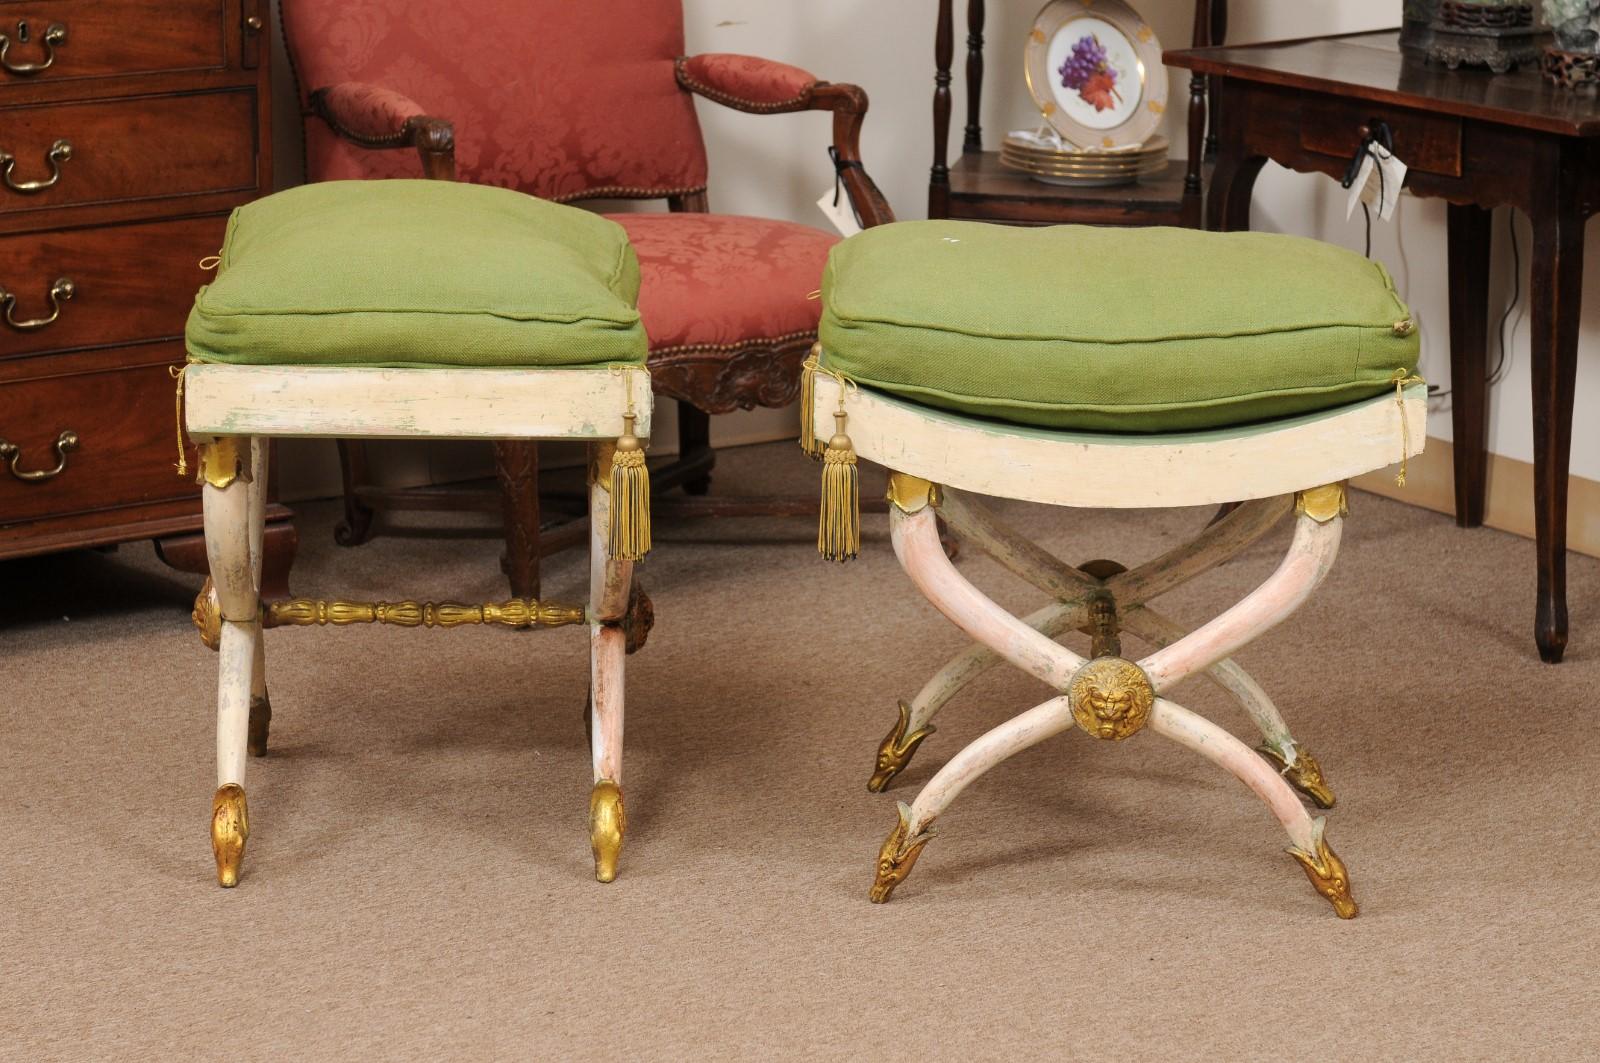 Pair of Painted and Parcel Gilt Horn Leg Benches with Saddle Seats, Italy ca. 1920 (No Cushions)
